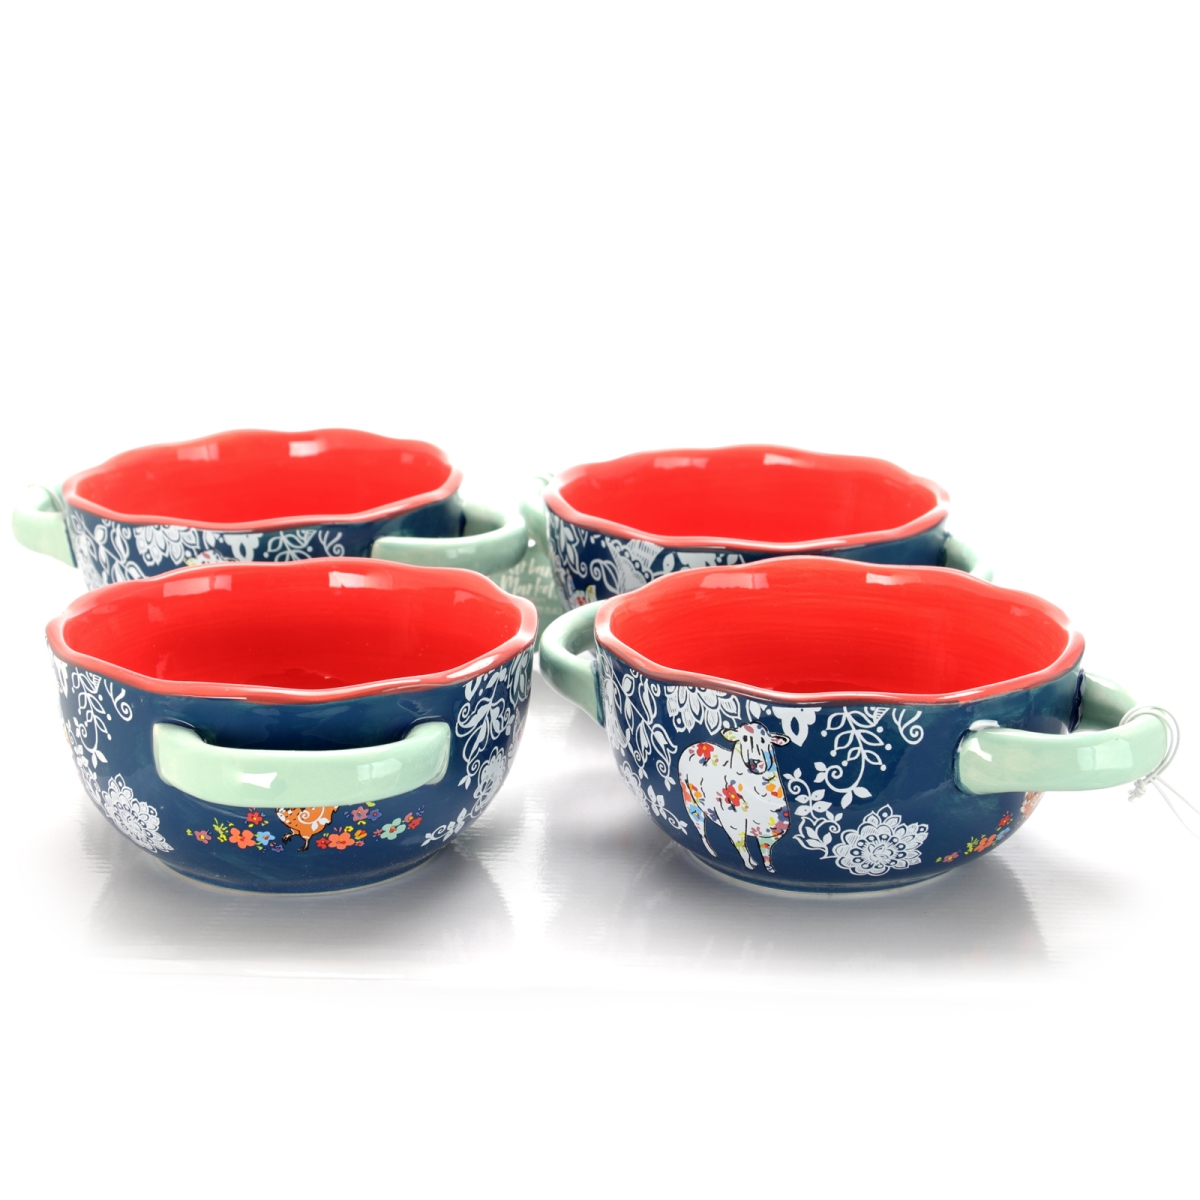 123205.01 6 In. Life On The Farm Ceramic Soup Bowl Set With Handles - 4 Piece